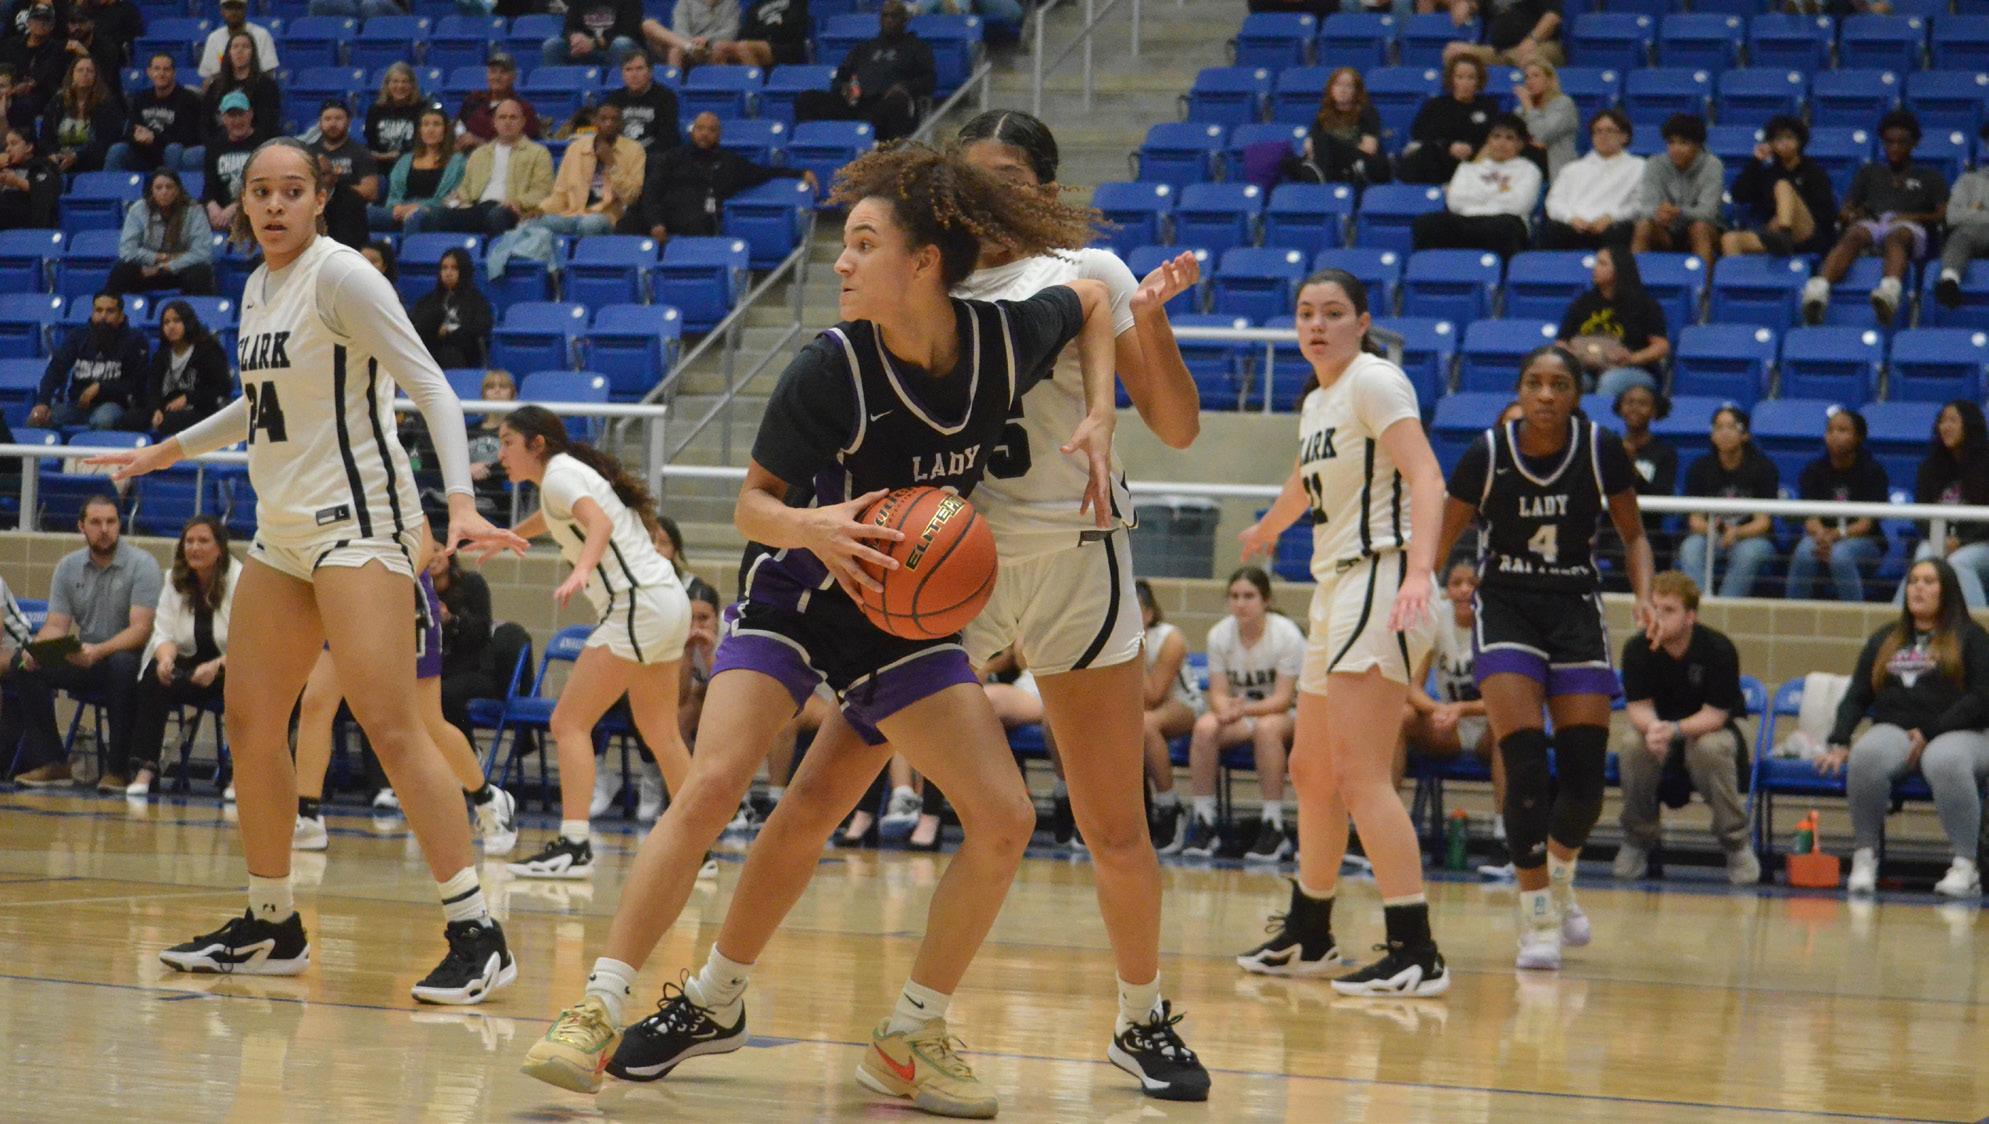 Lady Rattlers fall to defending state champion Clark